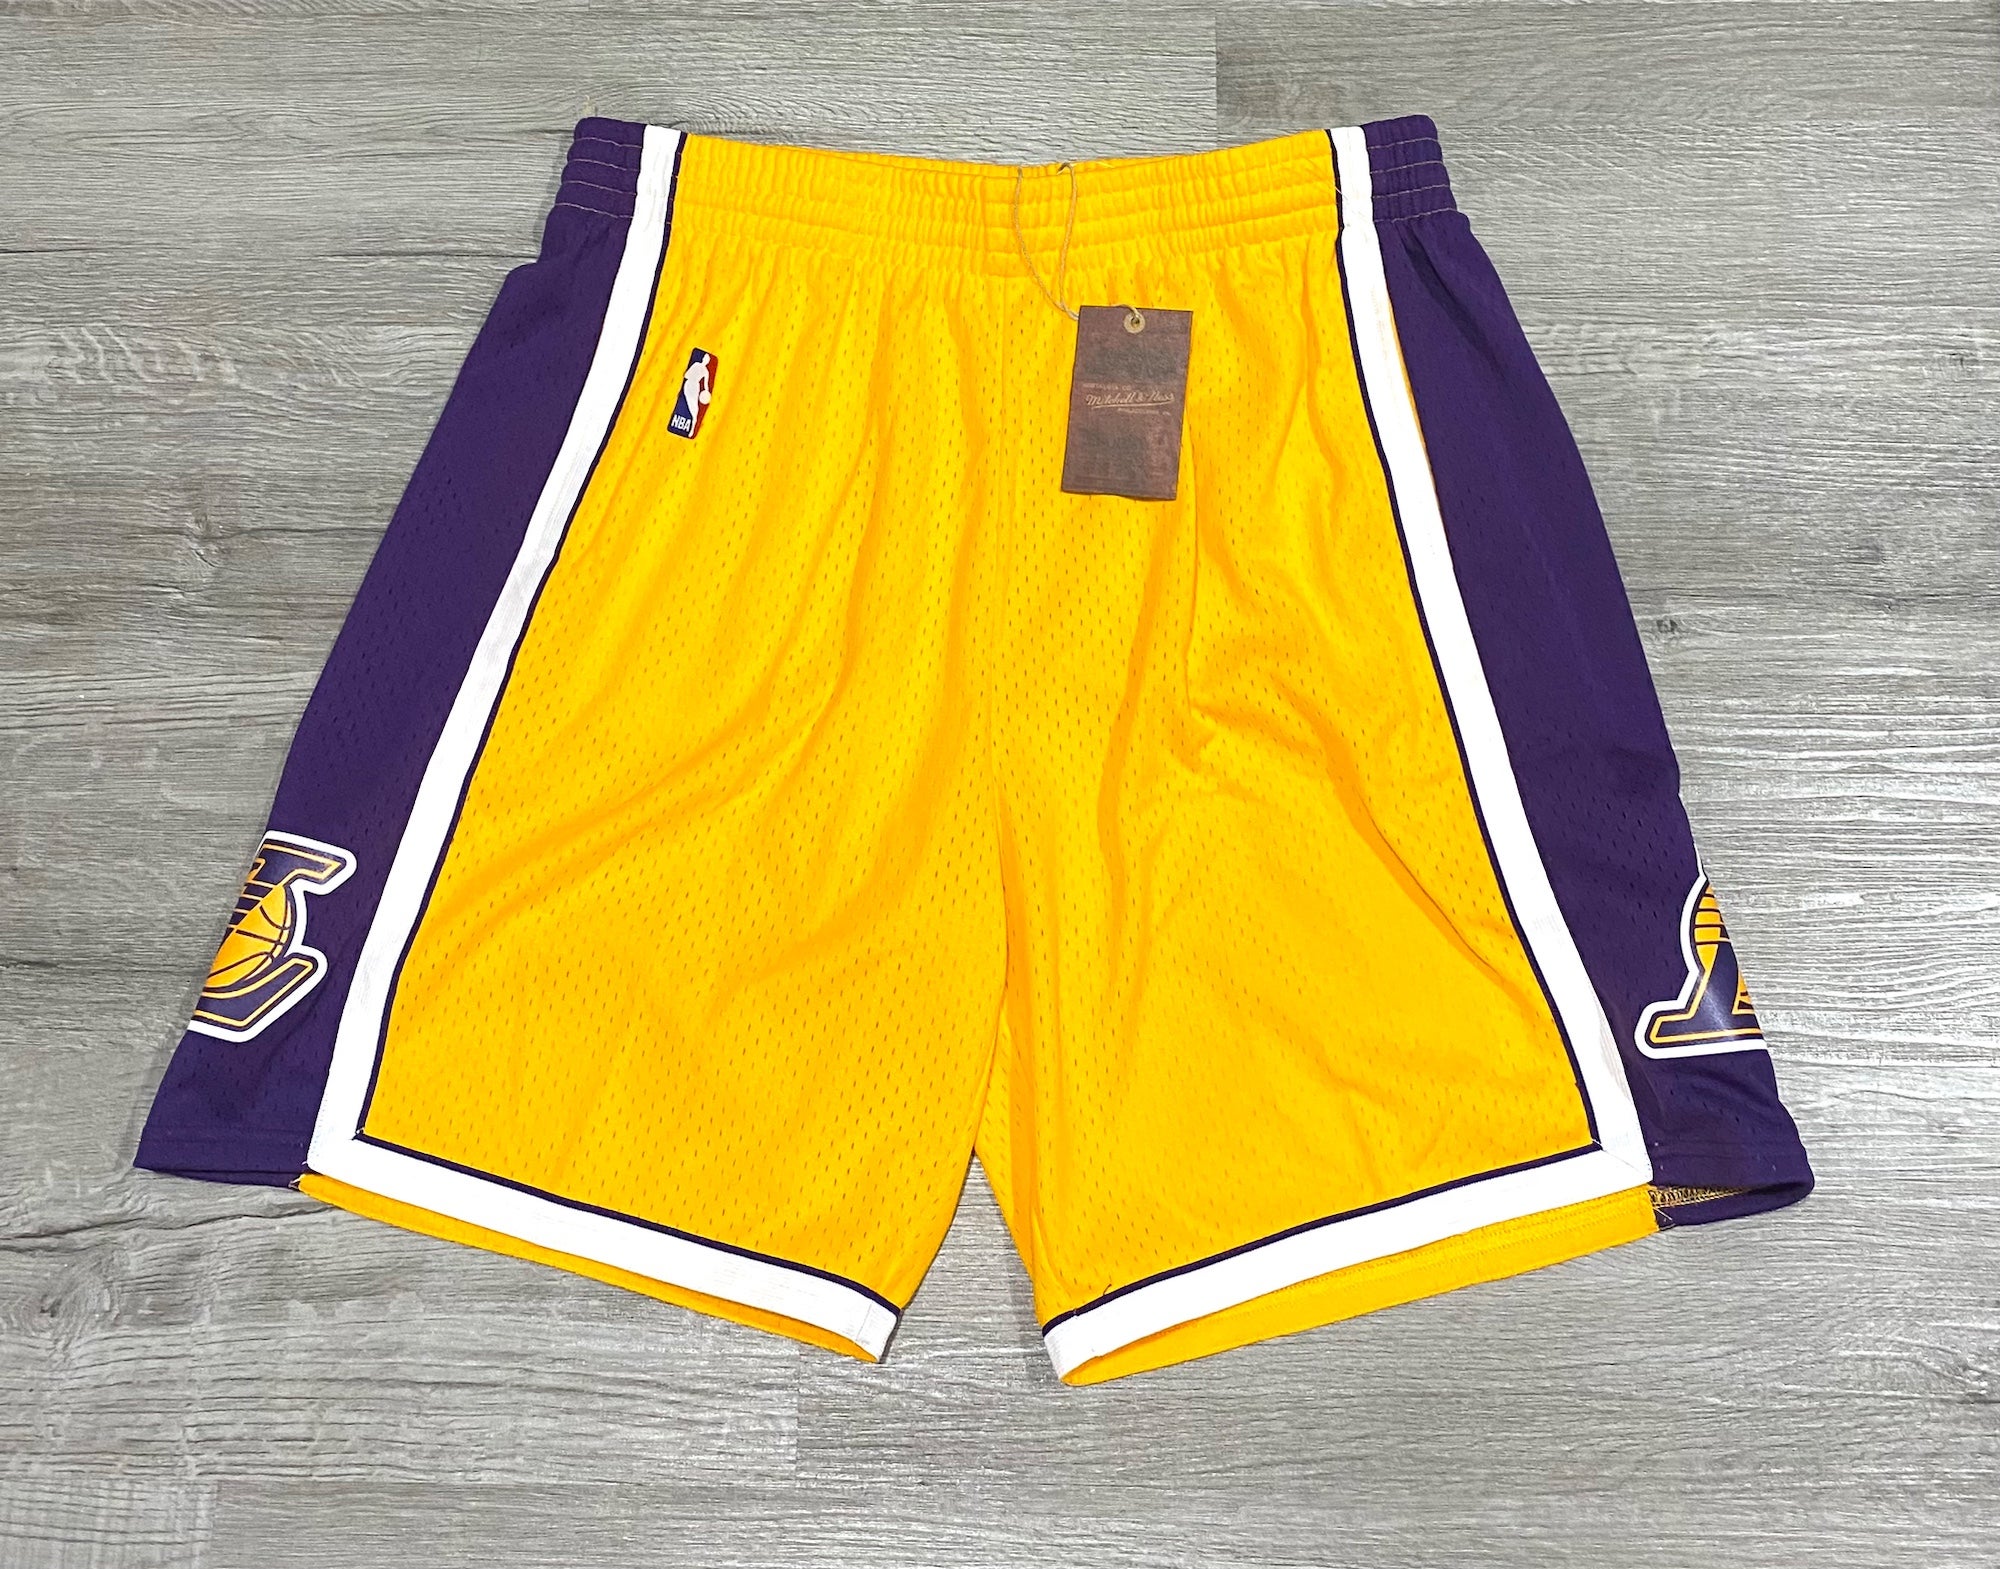 Authentic Shorts Los Angeles Lakers Alternate 1996-97 - Shop Mitchell &  Ness Bottoms and Shorts Mitchell & Ness Nostalgia Co.